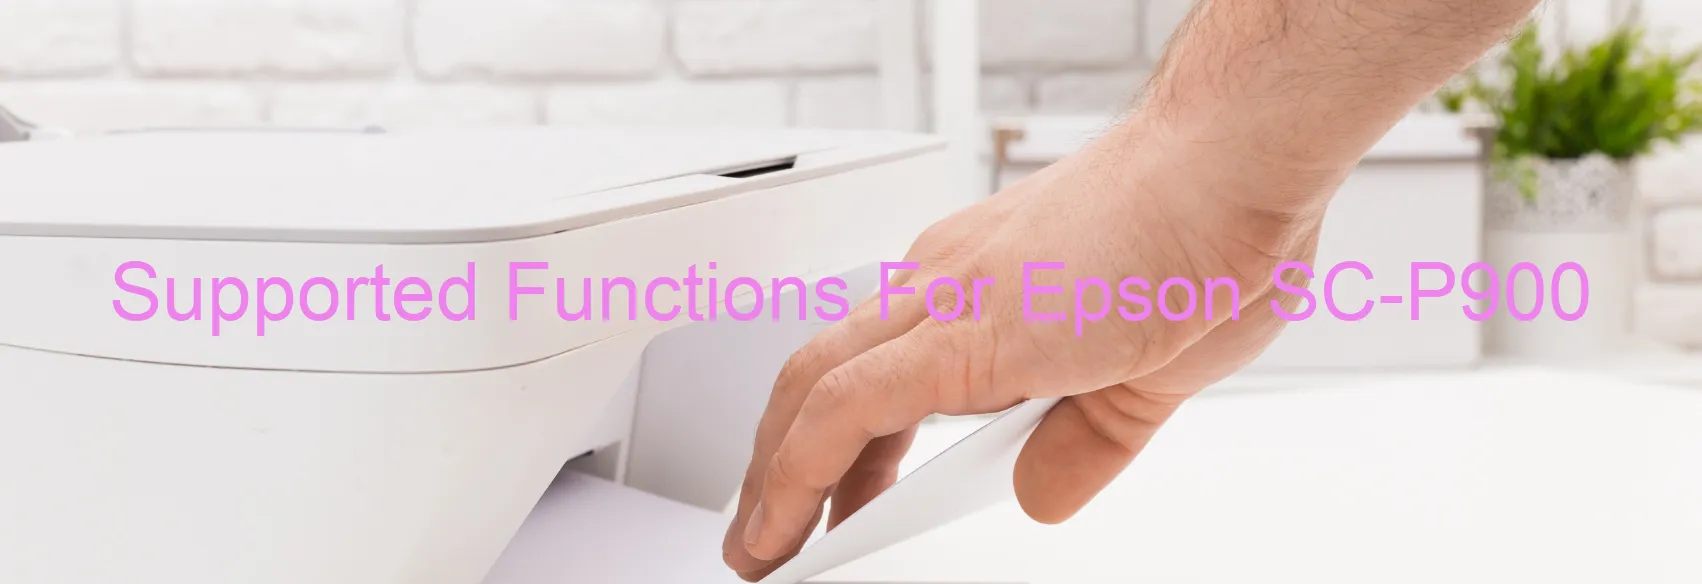 Epson SC-P900 supported Functions